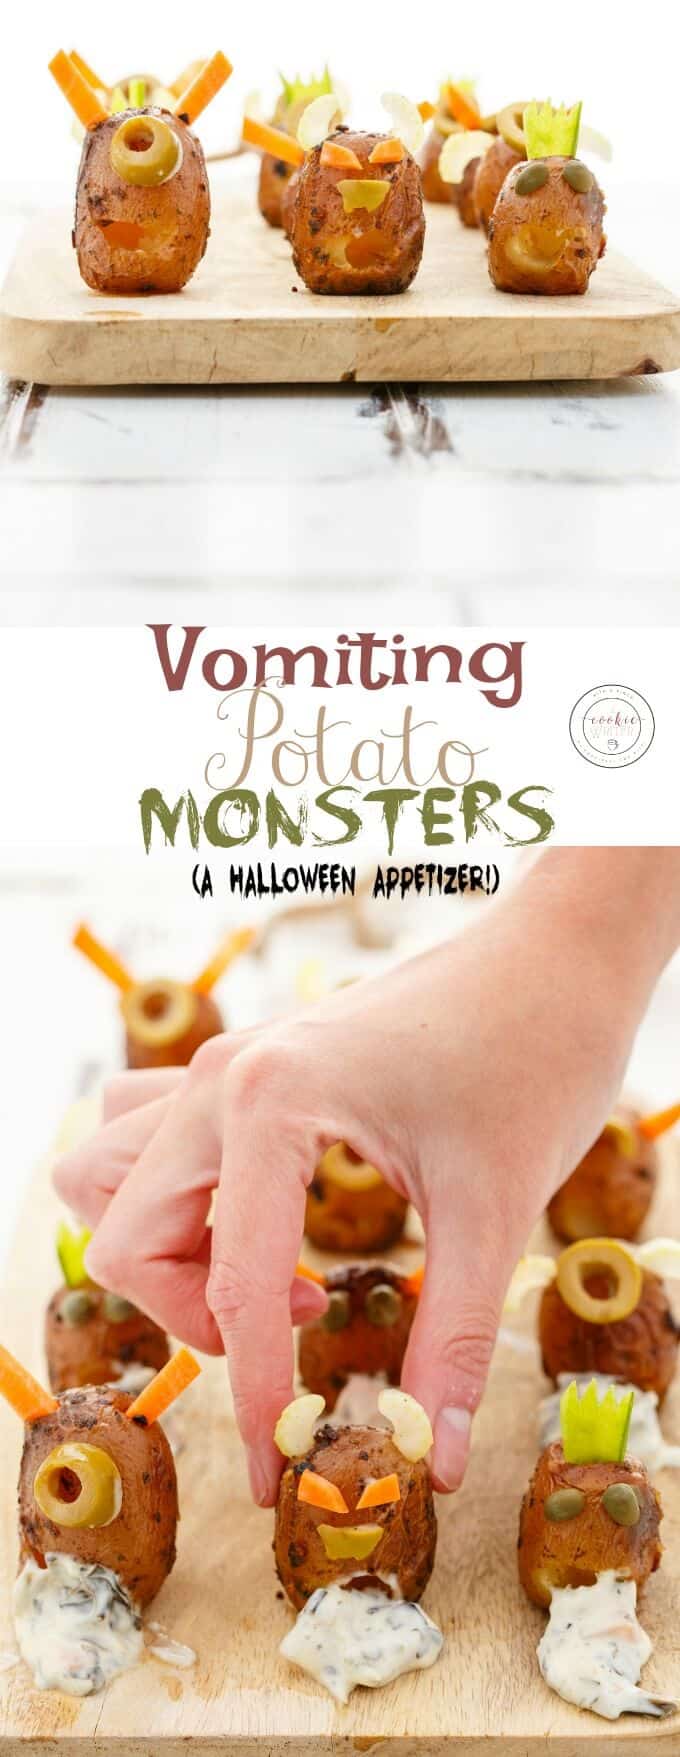 Vomiting Potato Monsters (for Halloween!) - The Cookie Writer